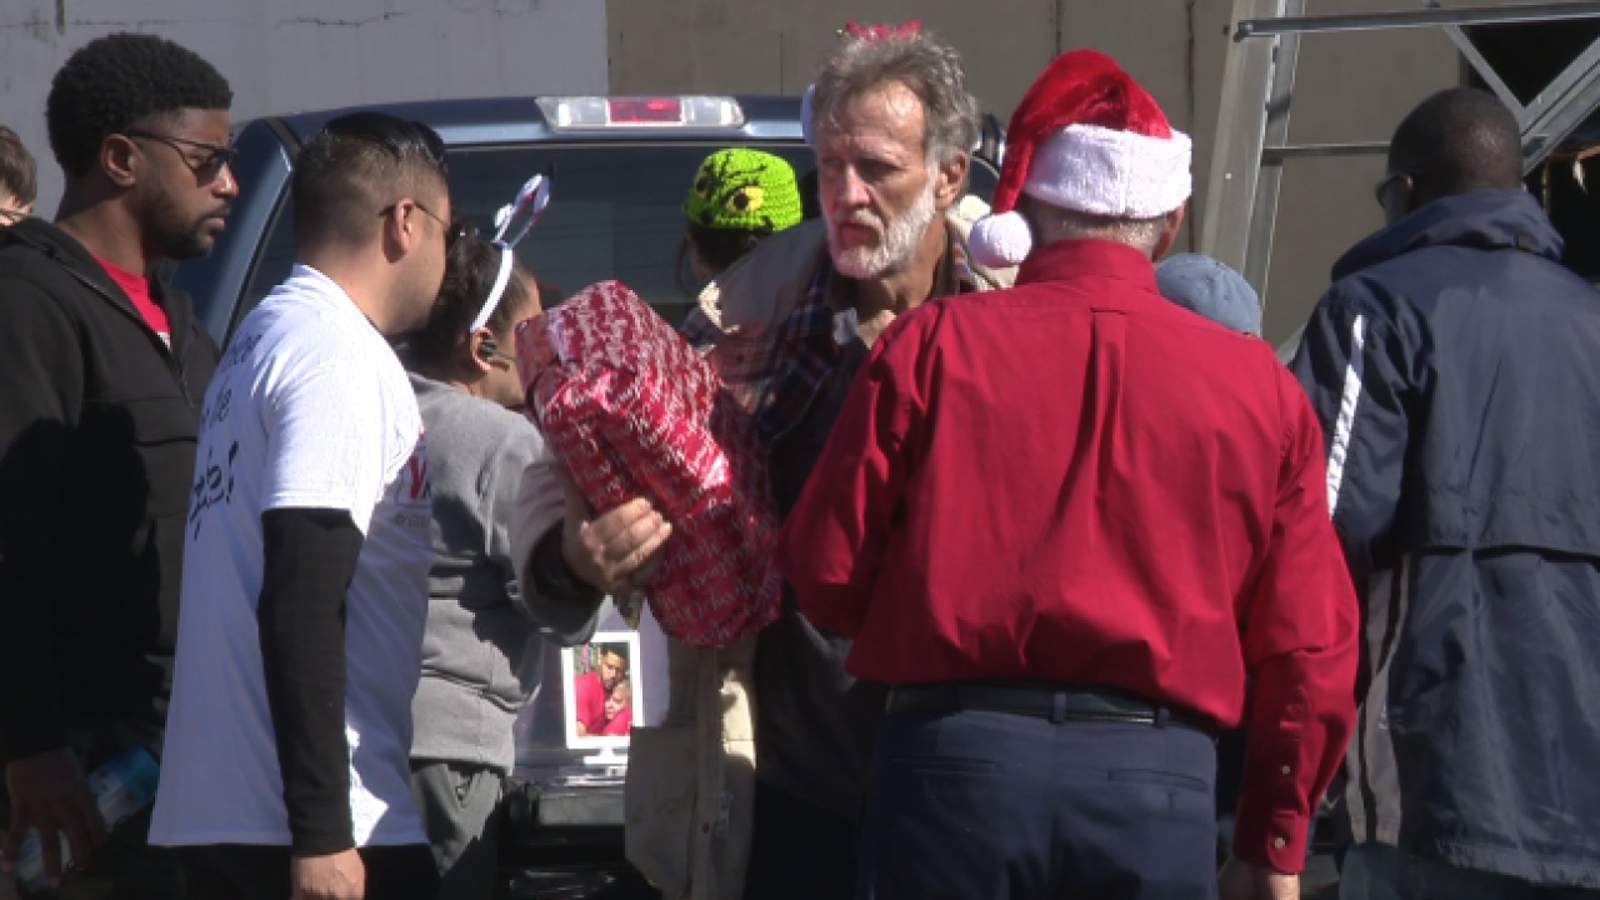 Holiday tradition gives presents to San Antonio’s homeless community